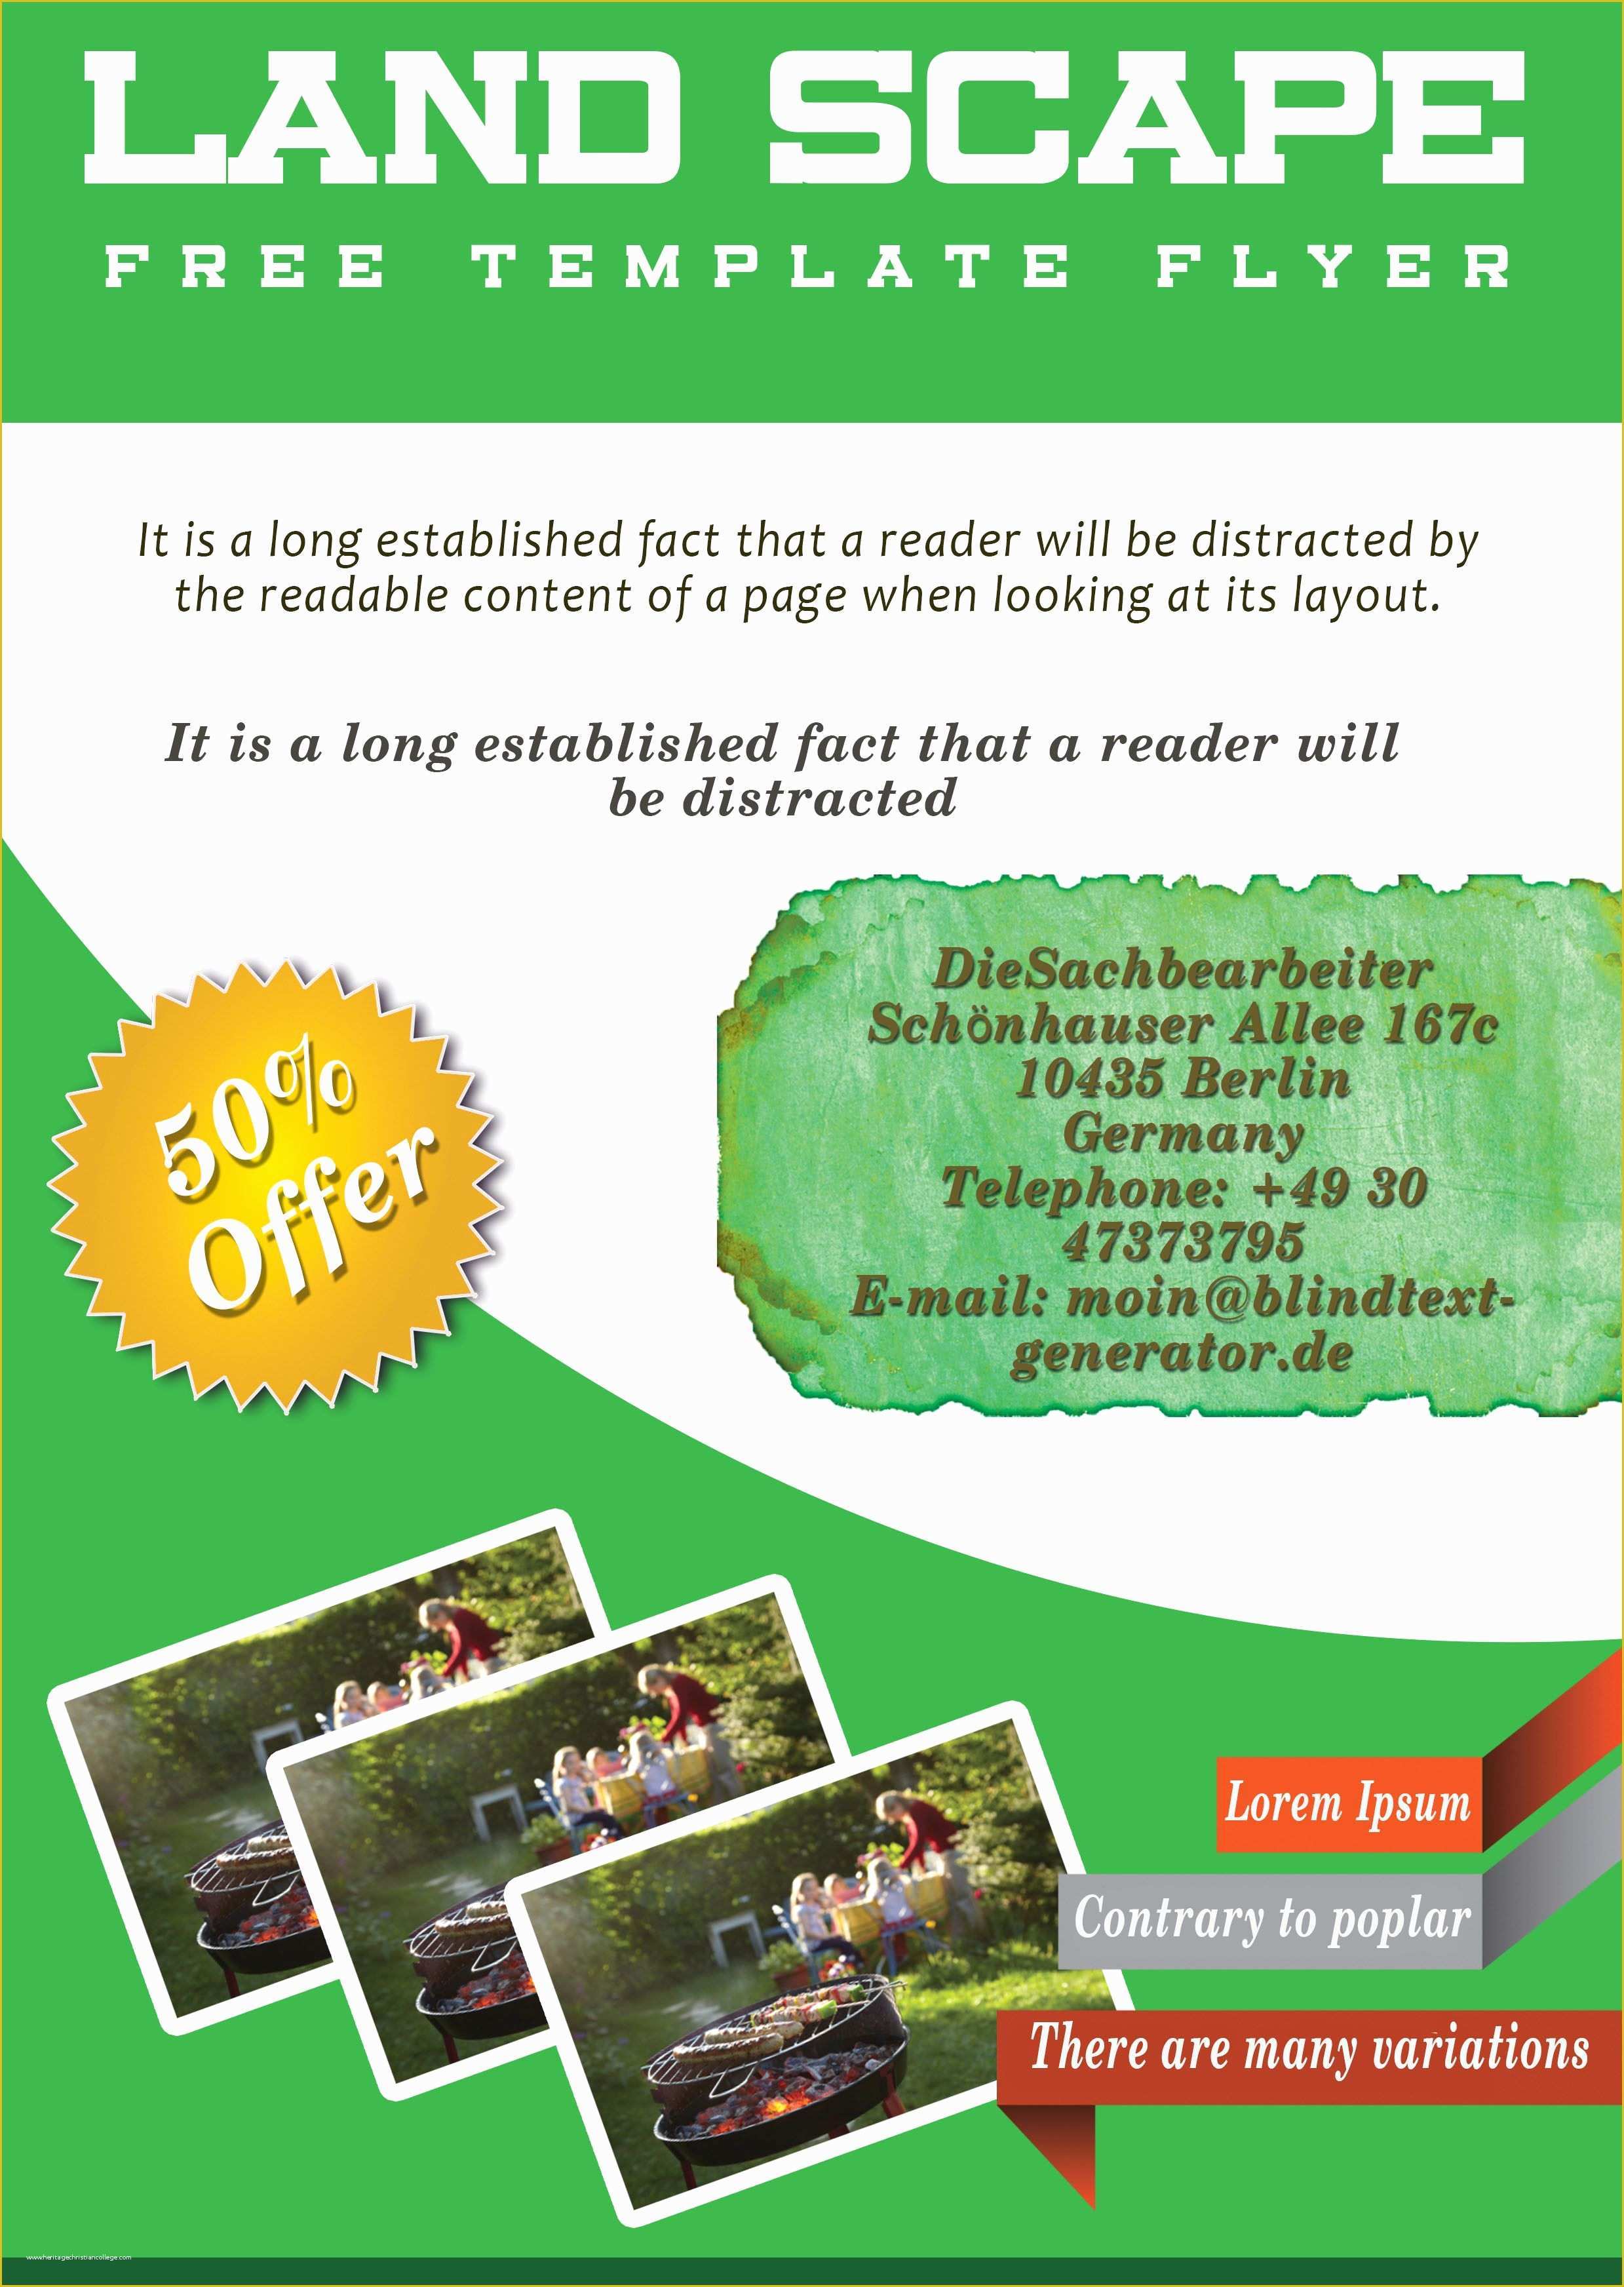 Free Flyer Templates Of Free Landscaping Flyer Templates to Power Lawn Care